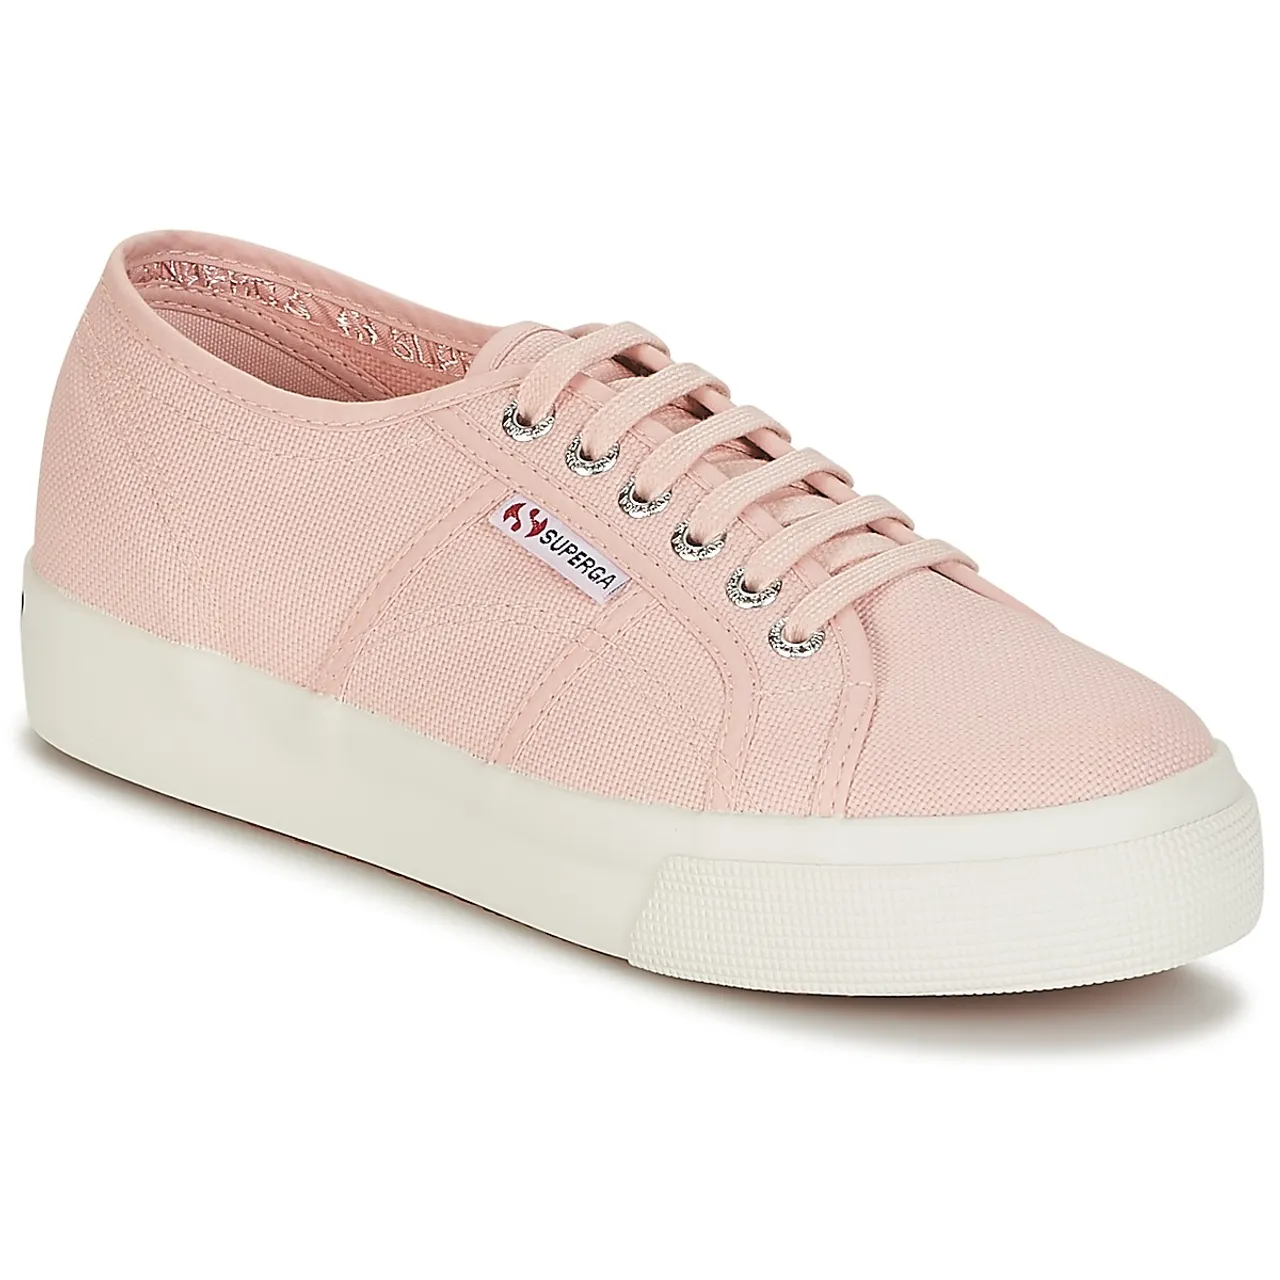 Superga  2730 COTU  women's Shoes (Trainers) in Pink